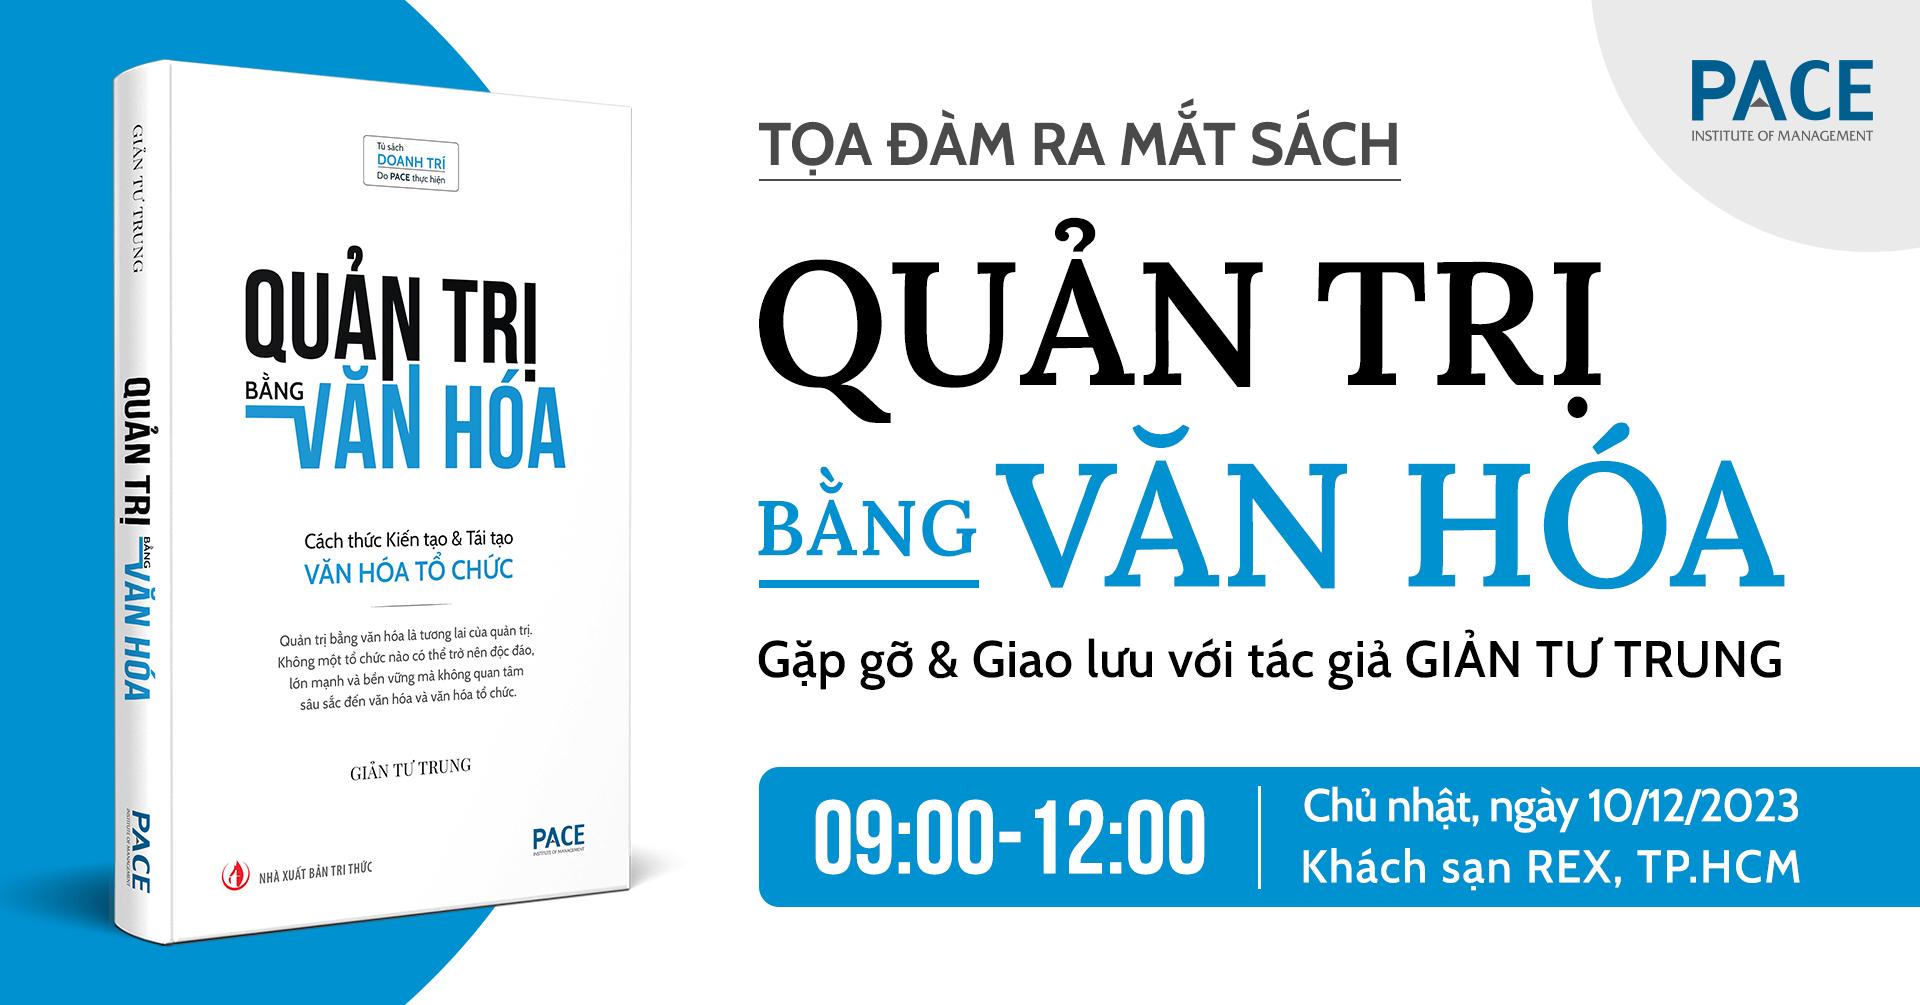 LAUNCHING THE BOOK "MANAGEMENT BY CULTURE": MEET & GREET WITH DR. GIAN TU TRUNG